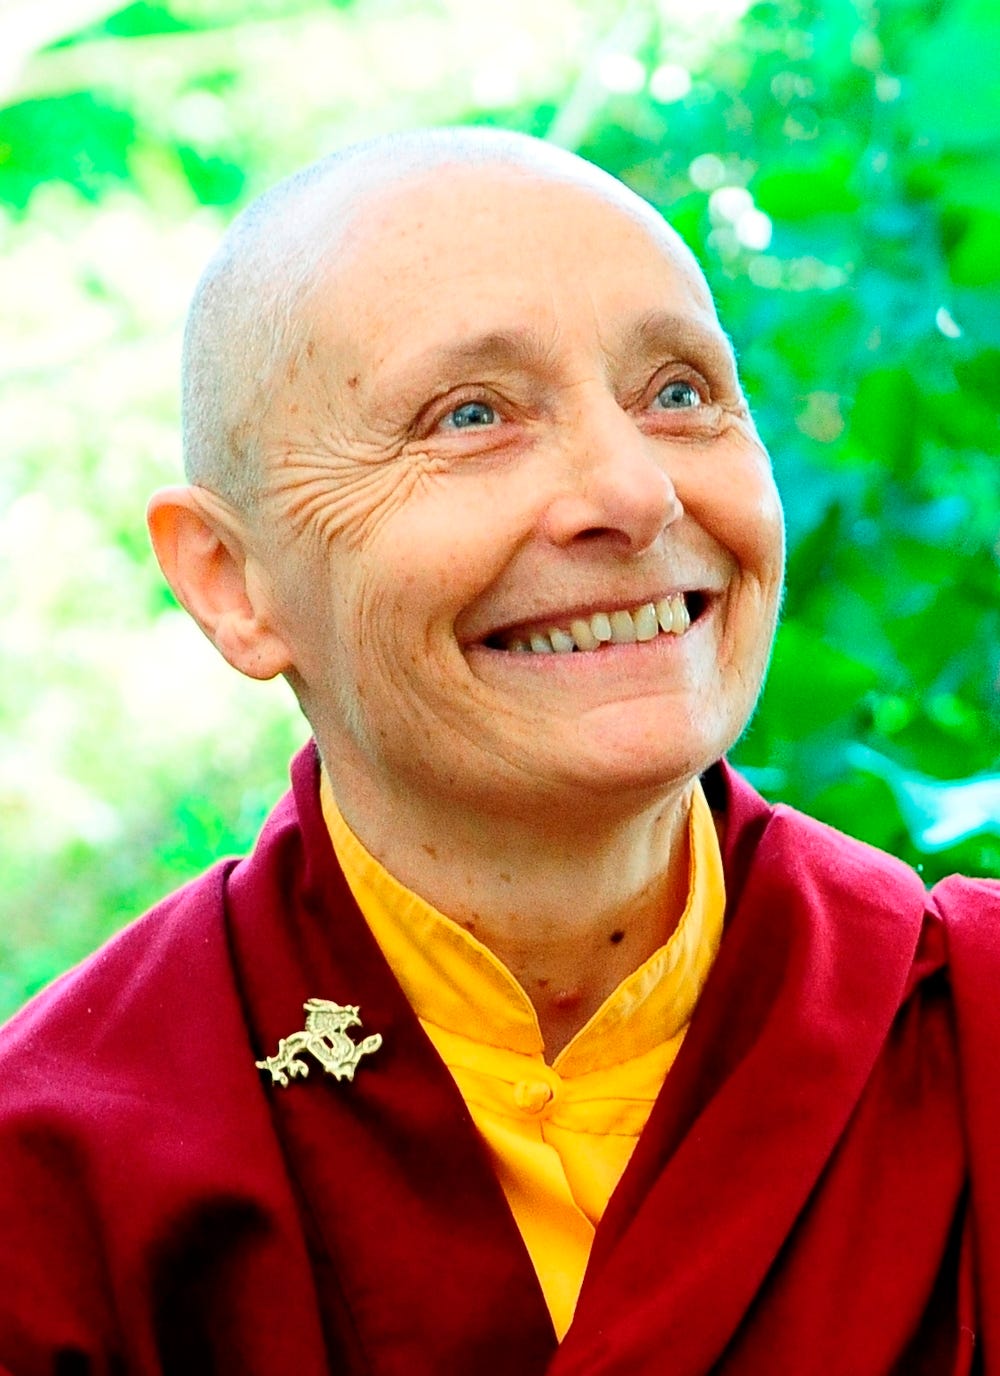 Words of Wisdom from a Buddhist Nun in Times of Coronavirus